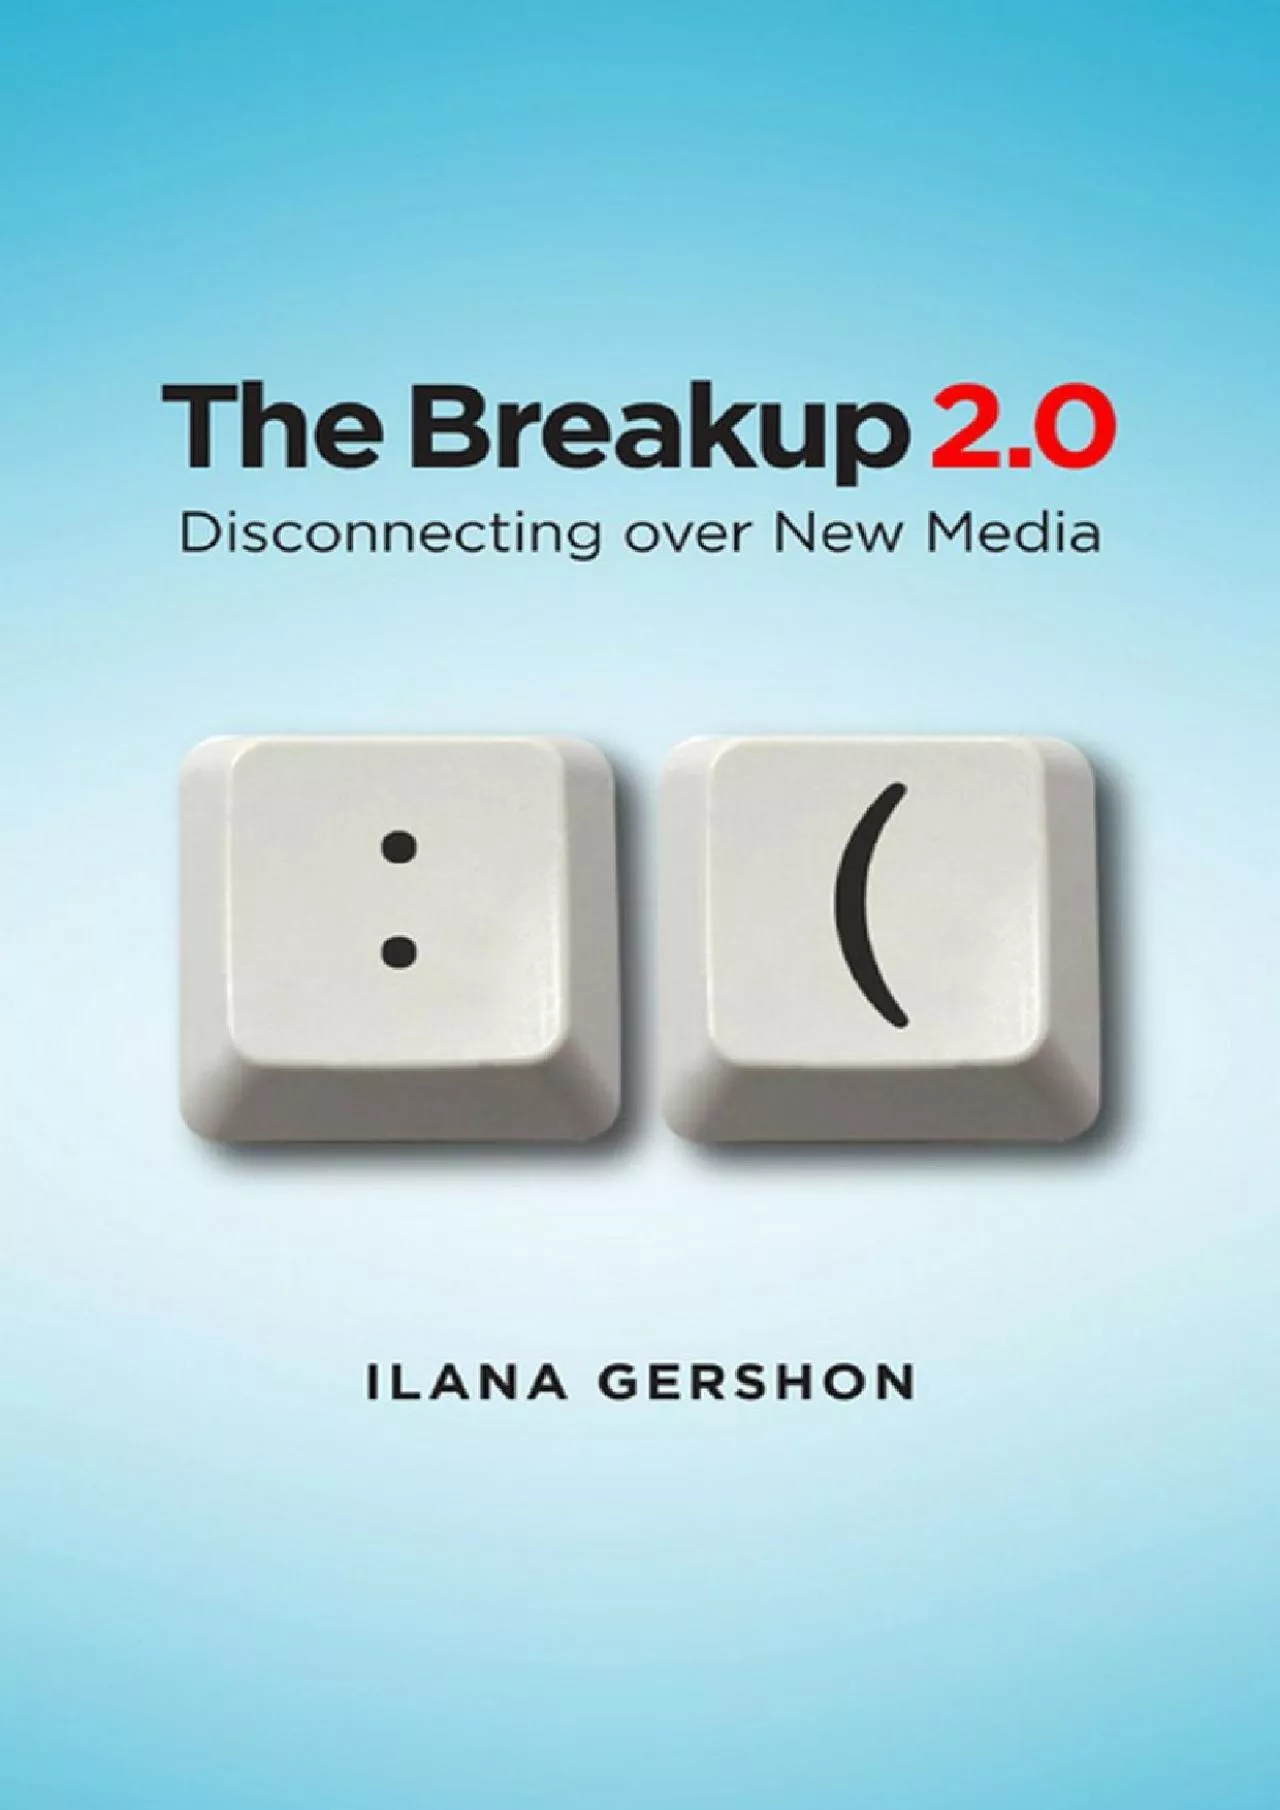 (DOWNLOAD)-The Breakup 20 Disconnecting over New Media